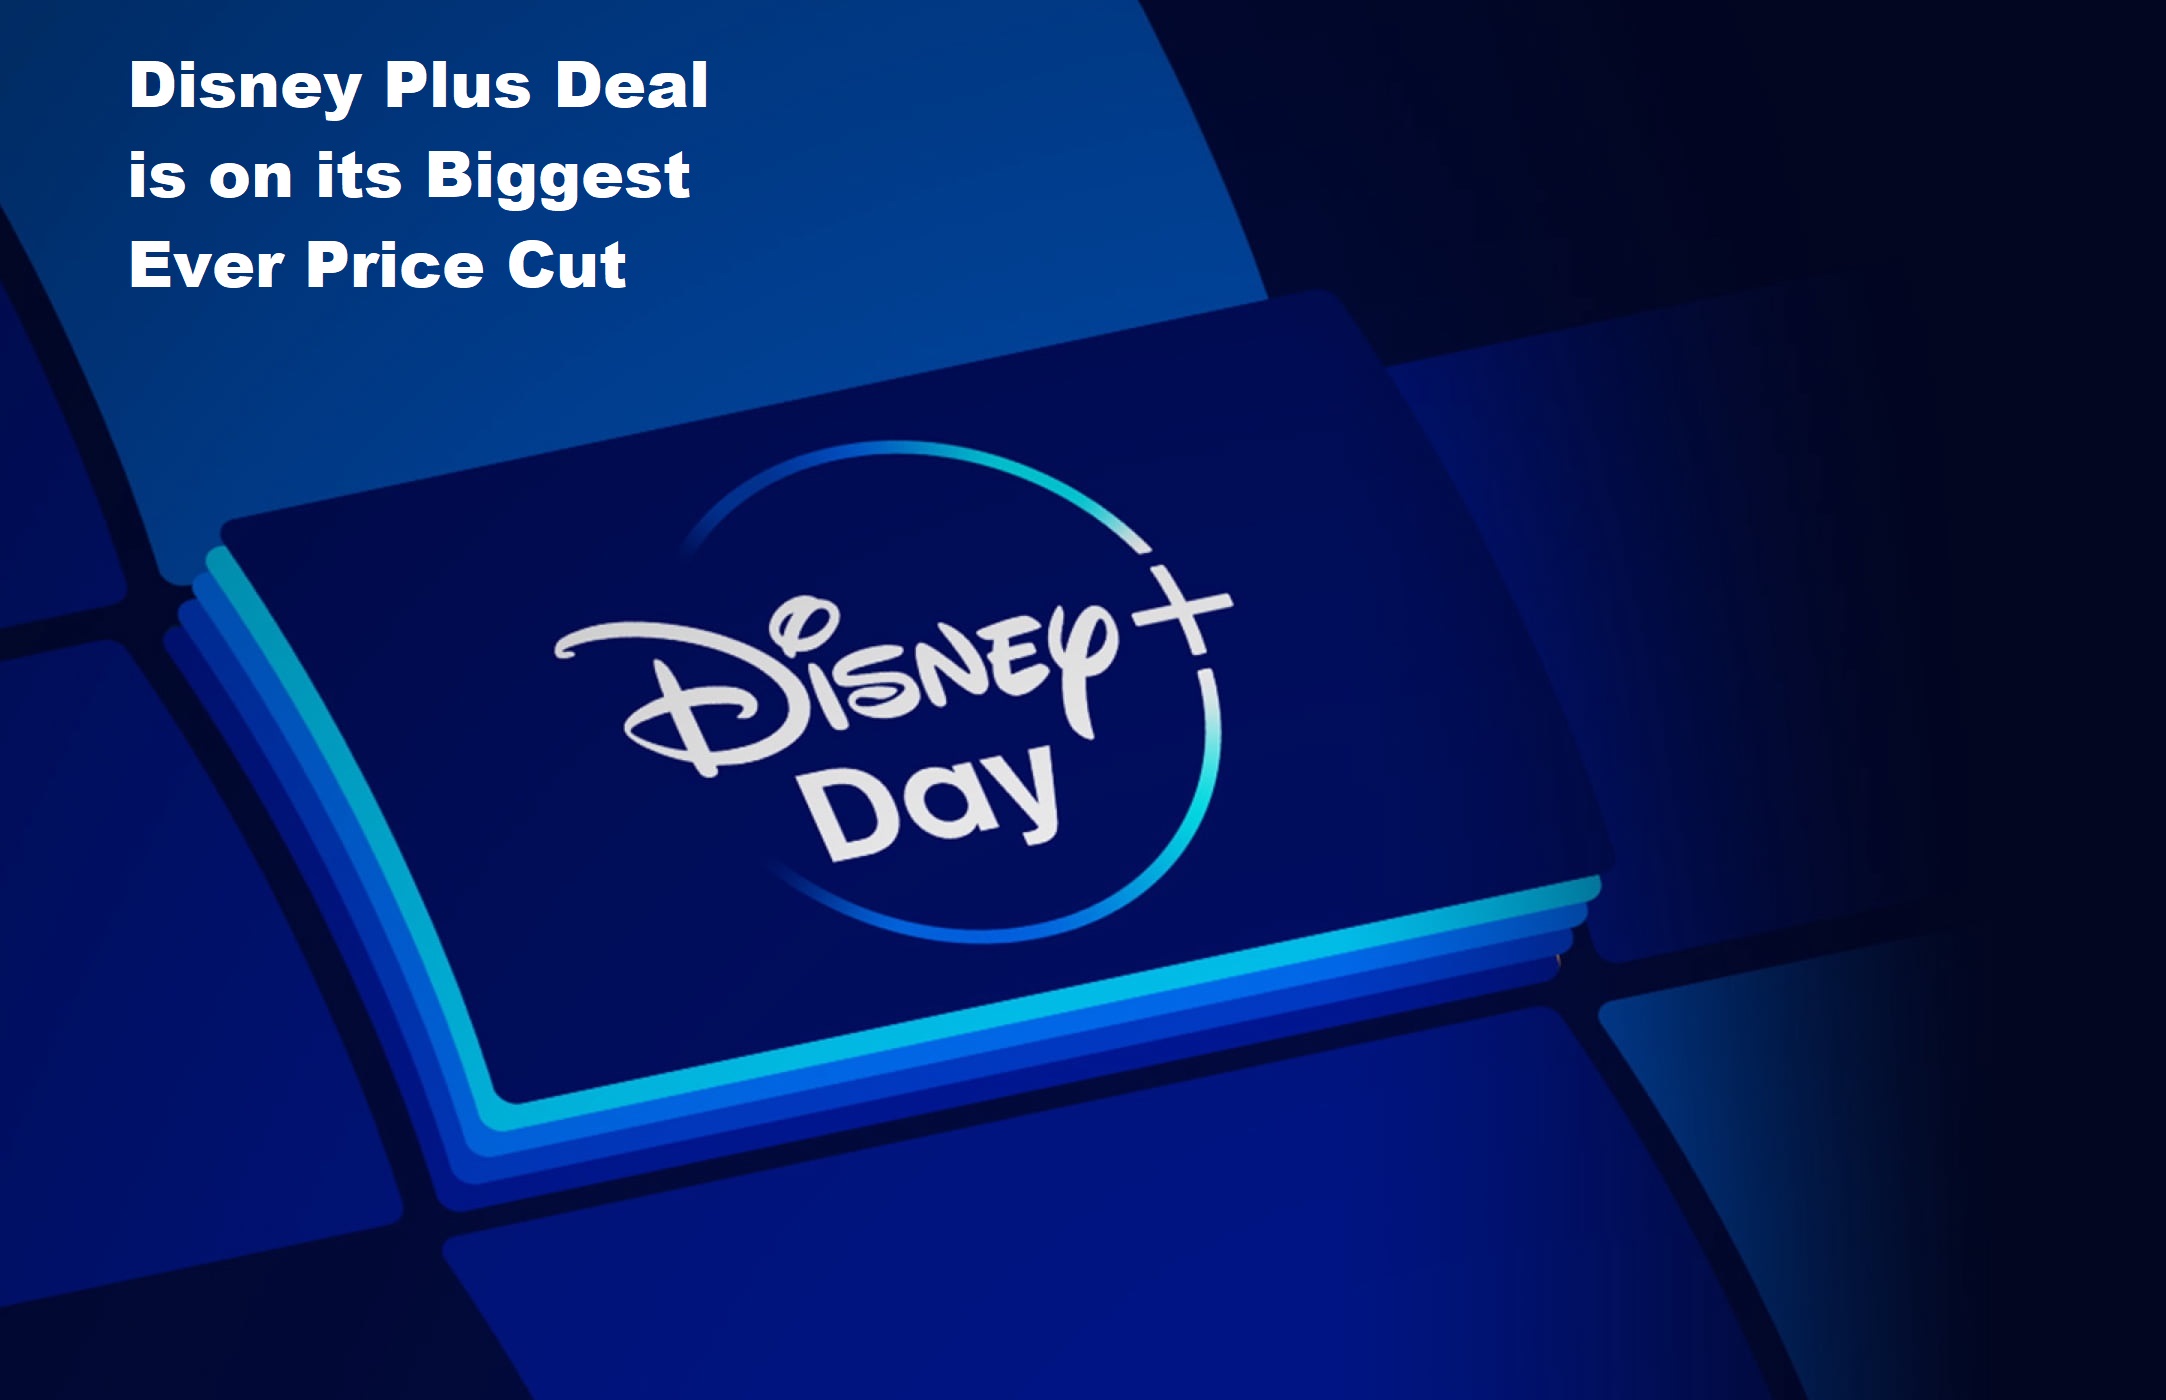 Disney Plus Deal is on its Biggest Ever Price Cut